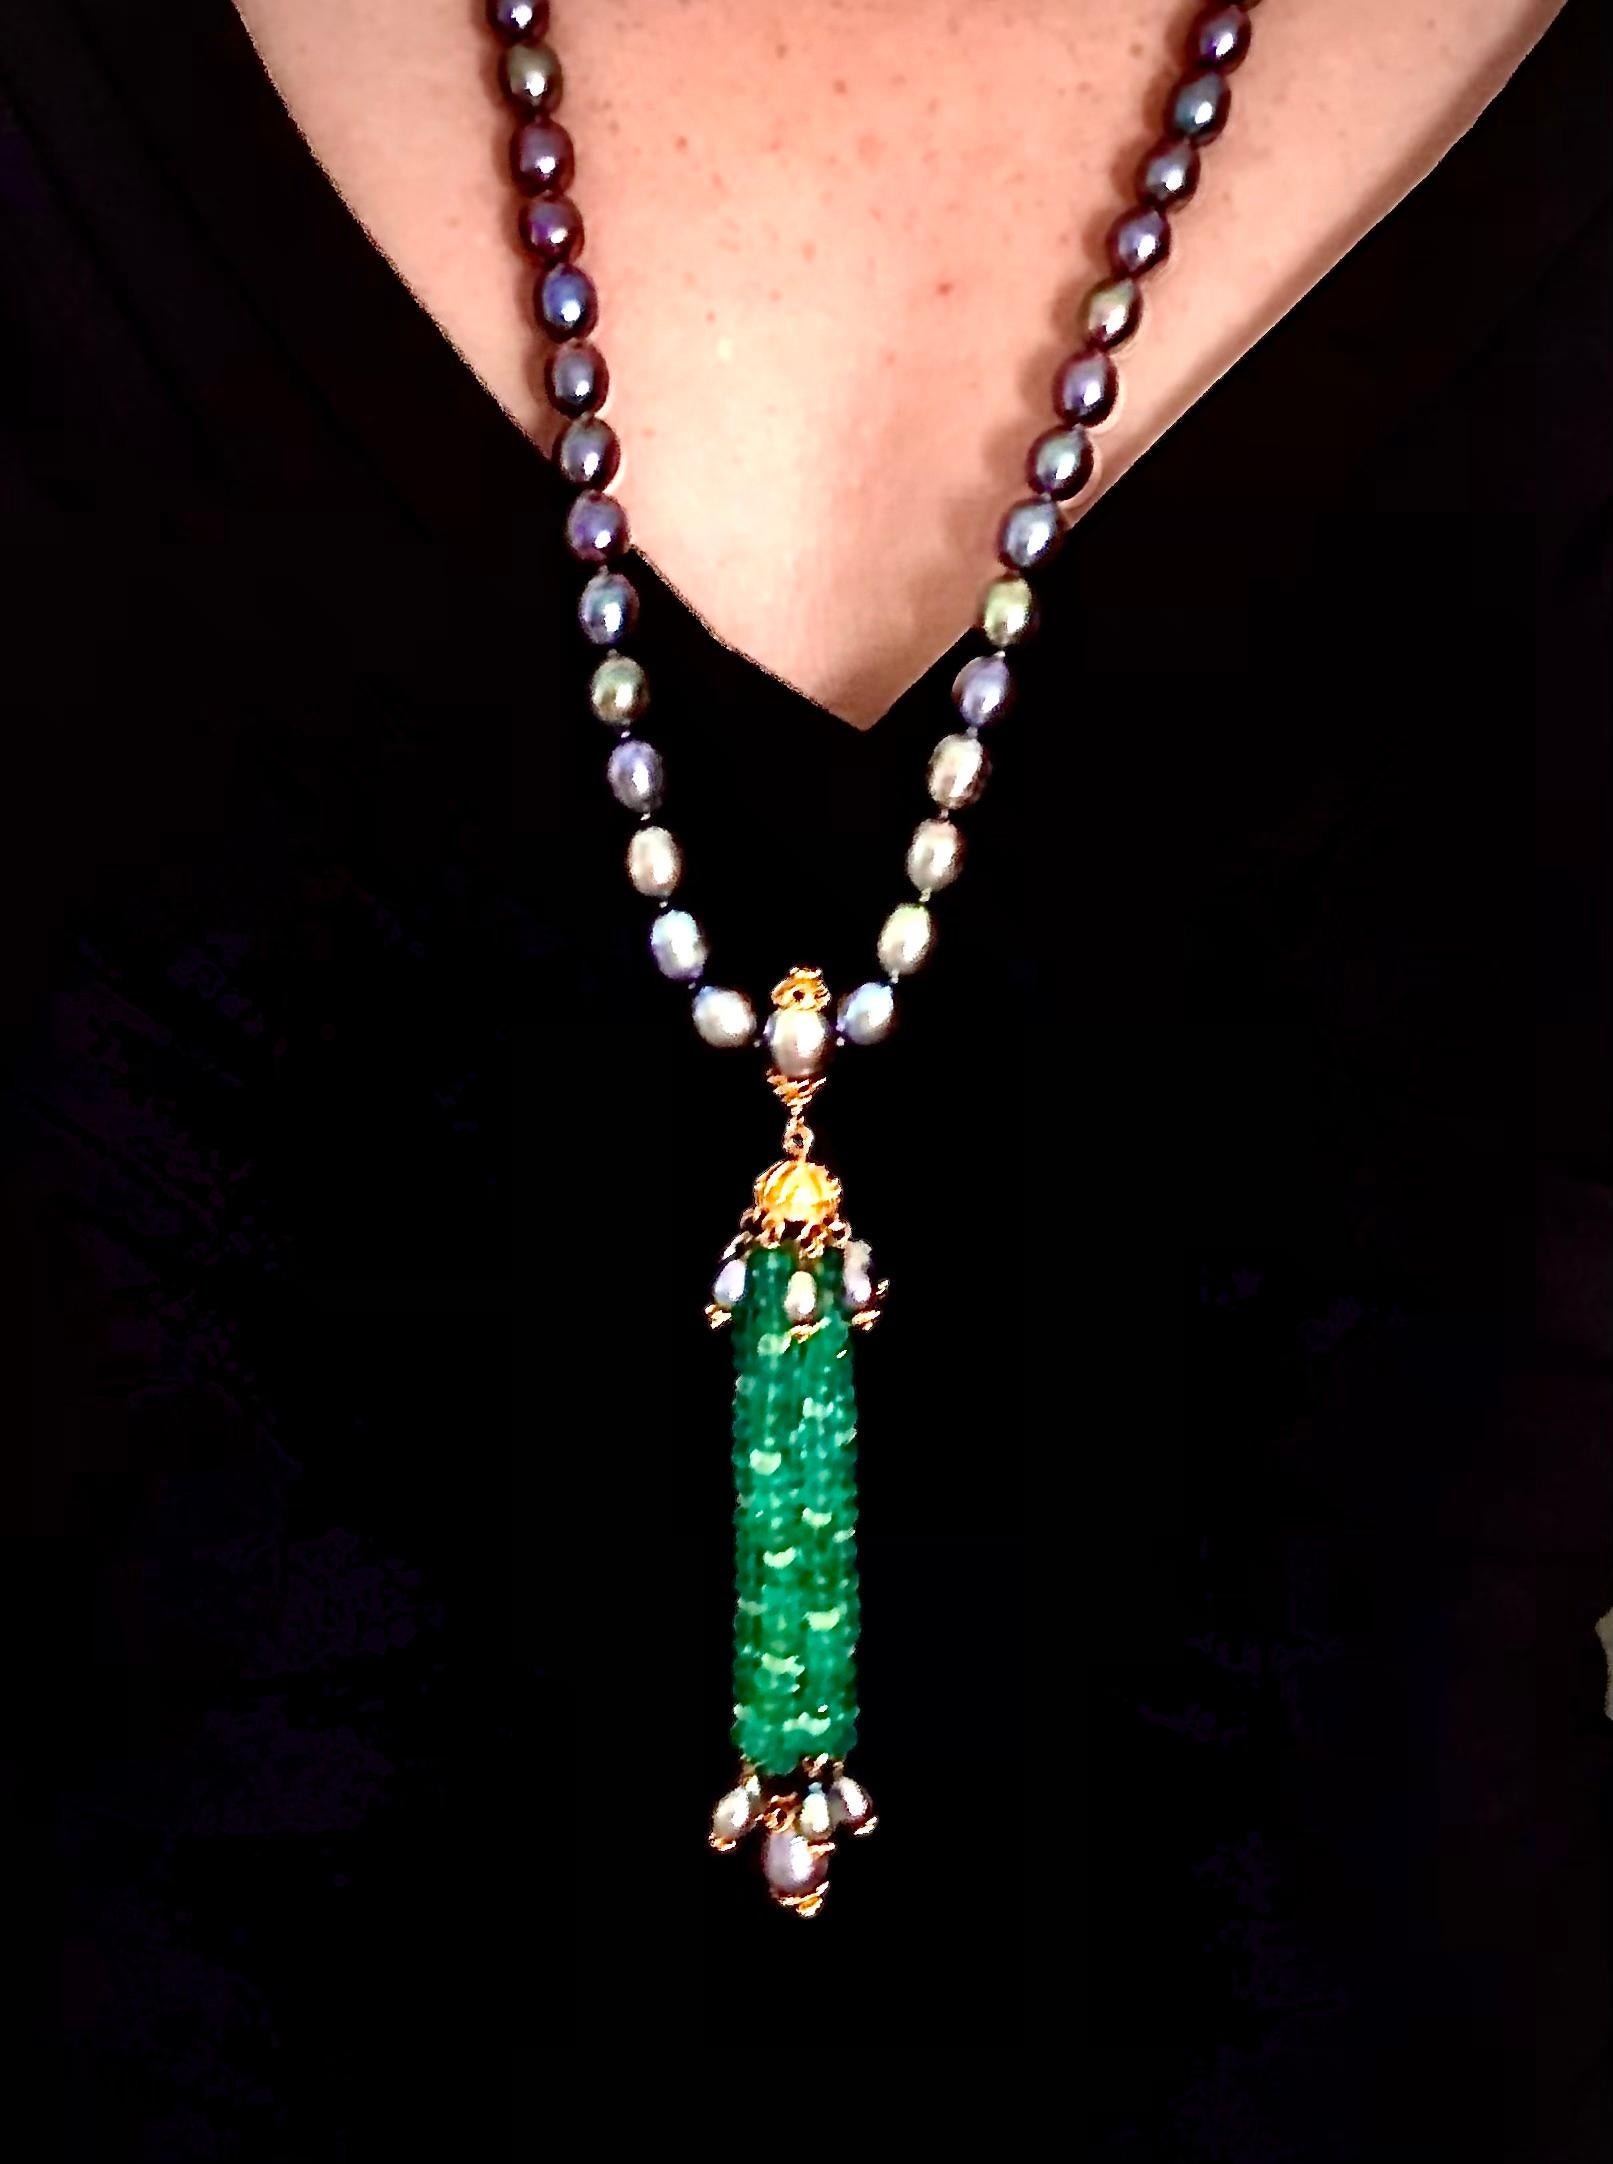 Bead Sautoir necklace w/ freshwater black pearls, emerald beads and rock crystals For Sale